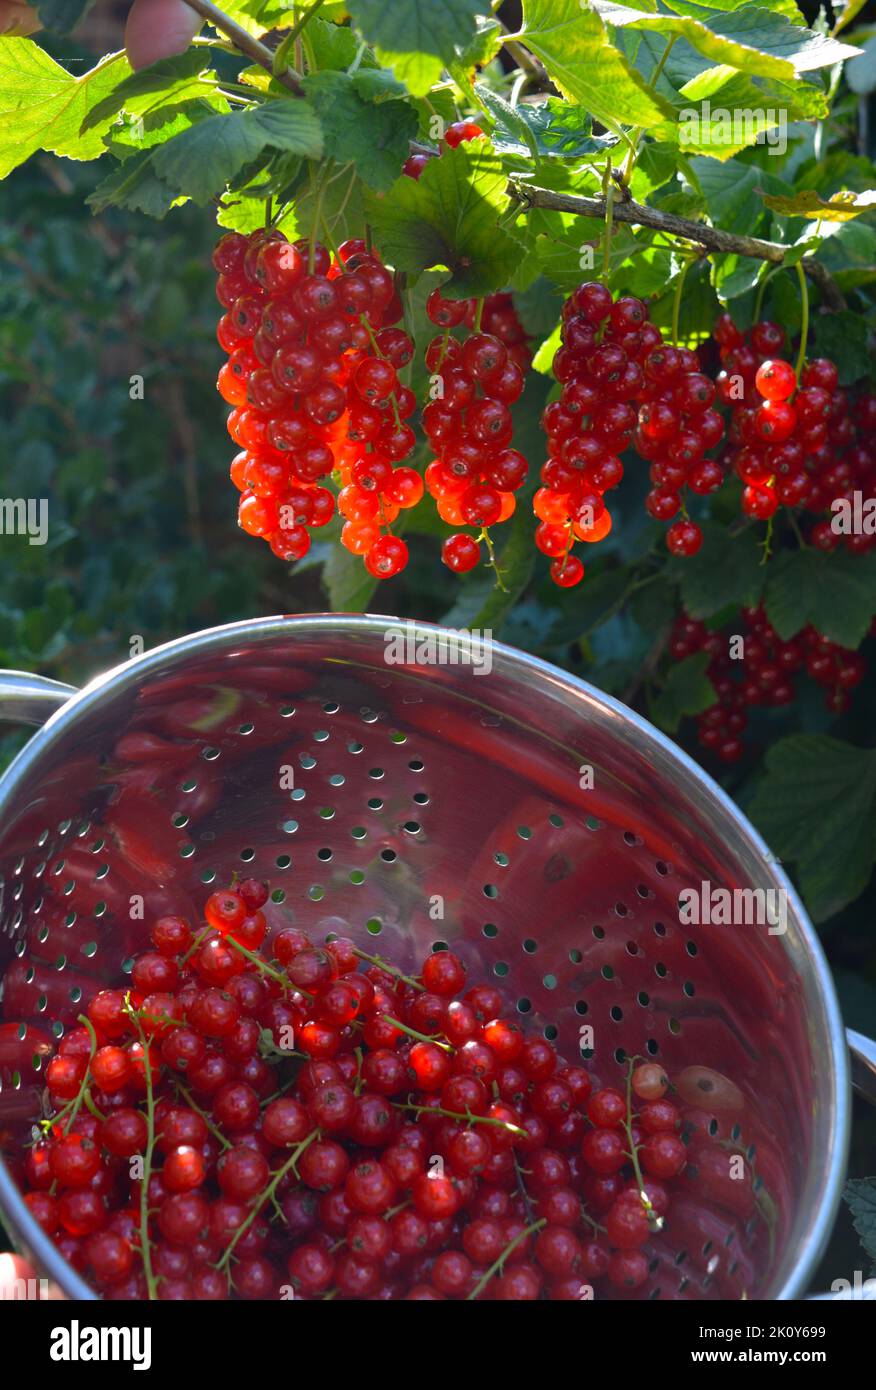 picking juicy ripe red currants, also known as Ribes rubrum Stock Photo